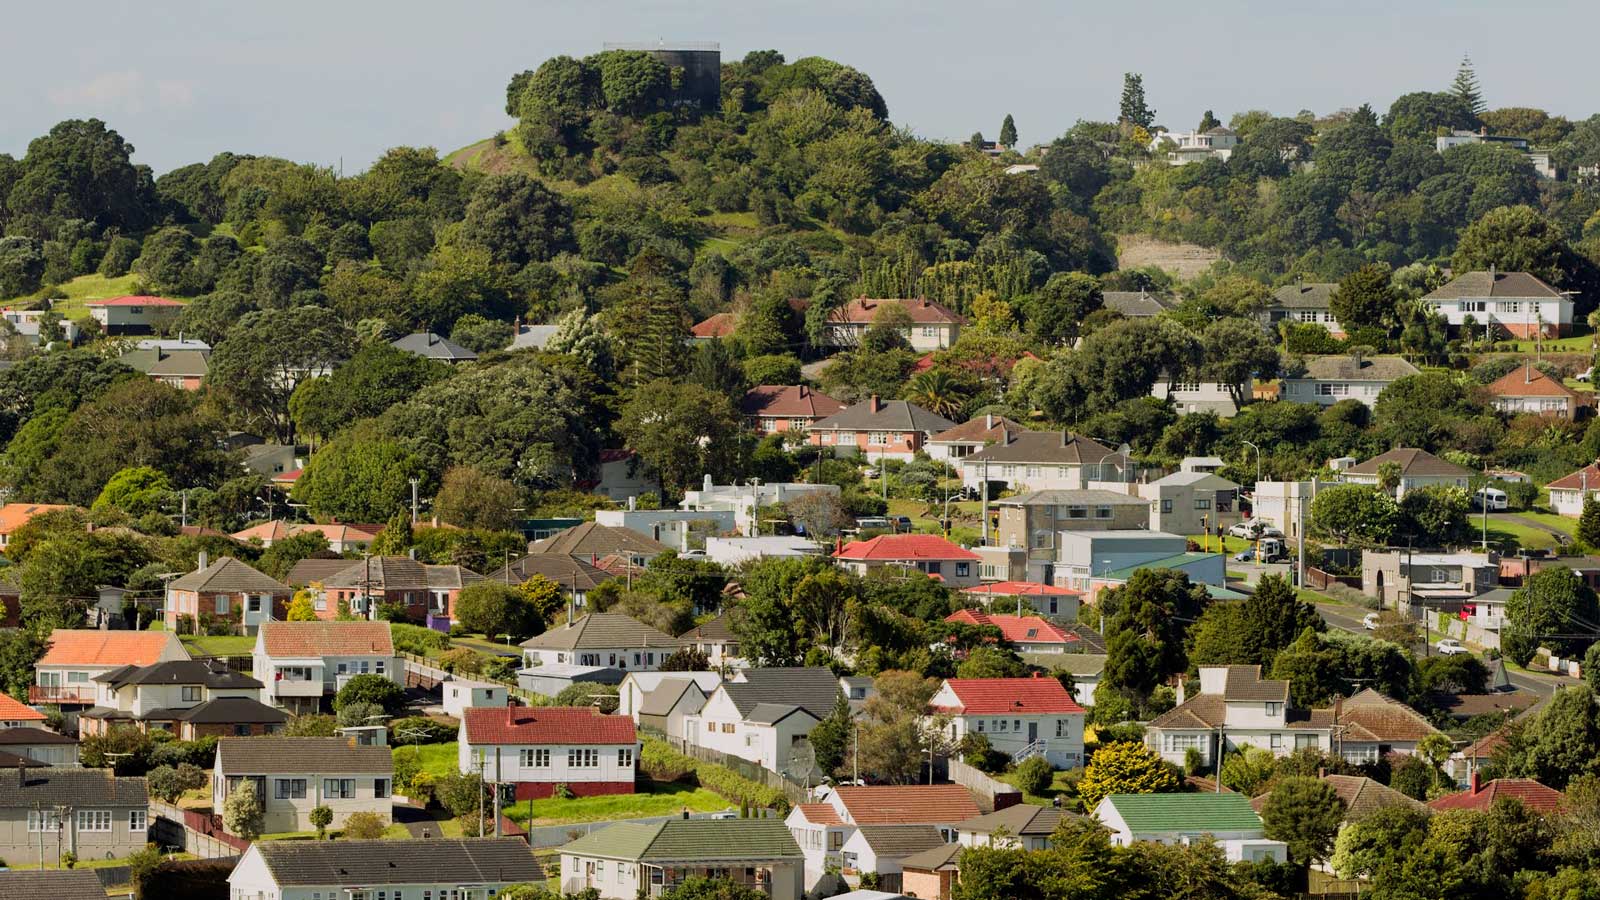 An aerial photograph of a suburb full of houses and trees.